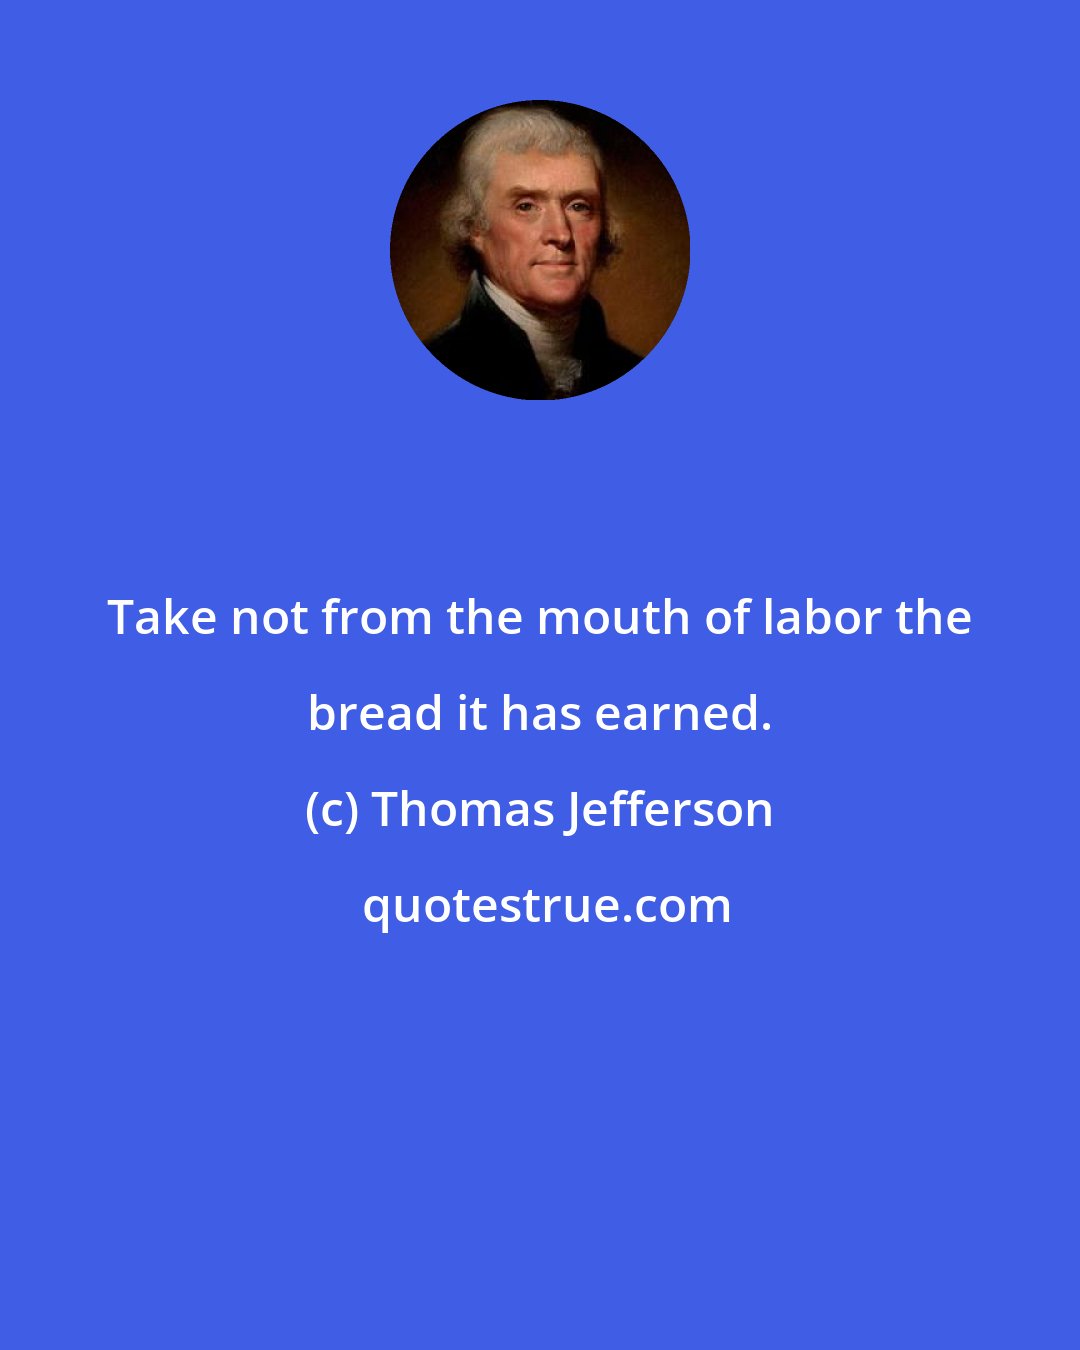 Thomas Jefferson: Take not from the mouth of labor the bread it has earned.